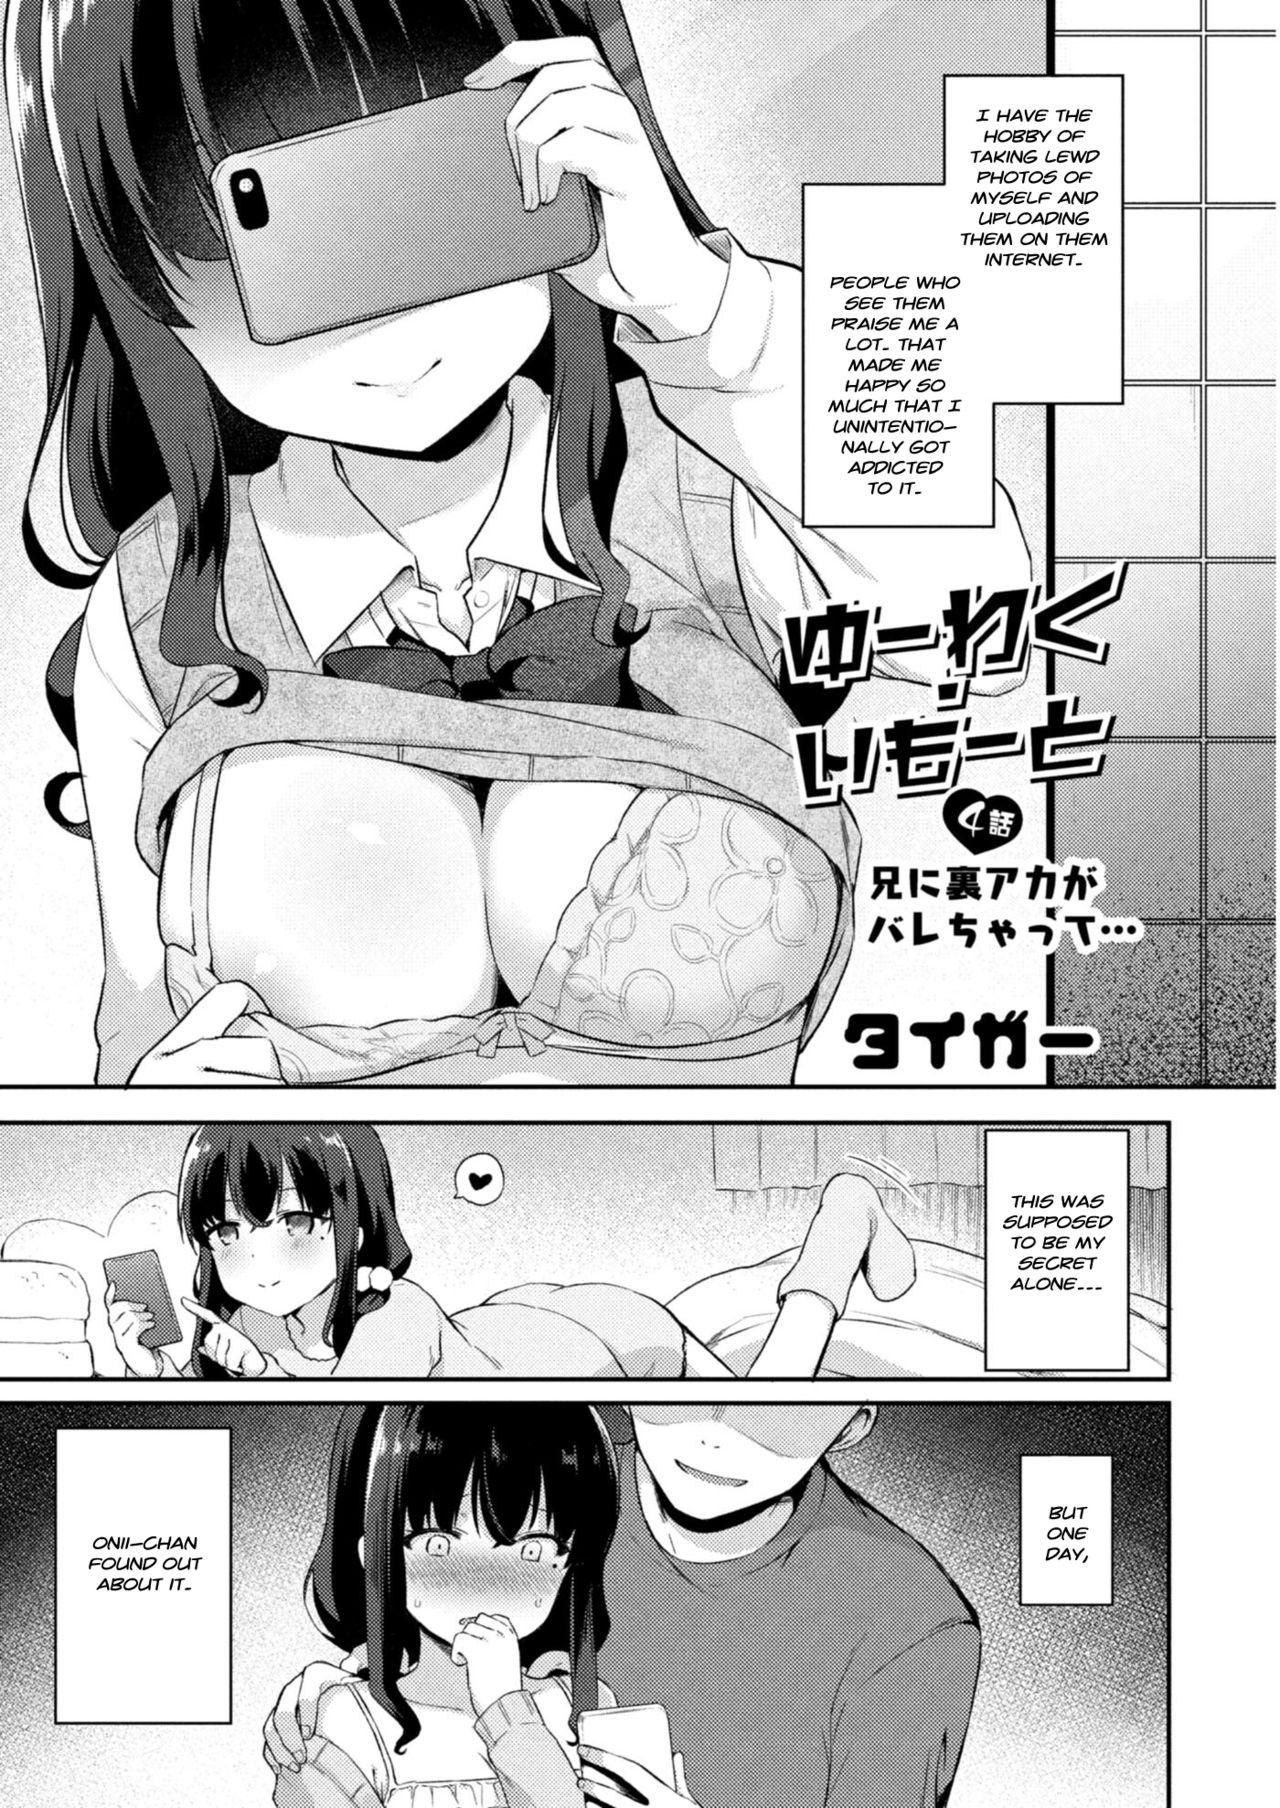 Free Blowjobs Yuuwaku・Imouto #4 Ani ni Uraaka ga Barechatt... | Little Sister Temptation #4 My Older Brother Found Out About my Secret Acc... Cosplay - Page 1